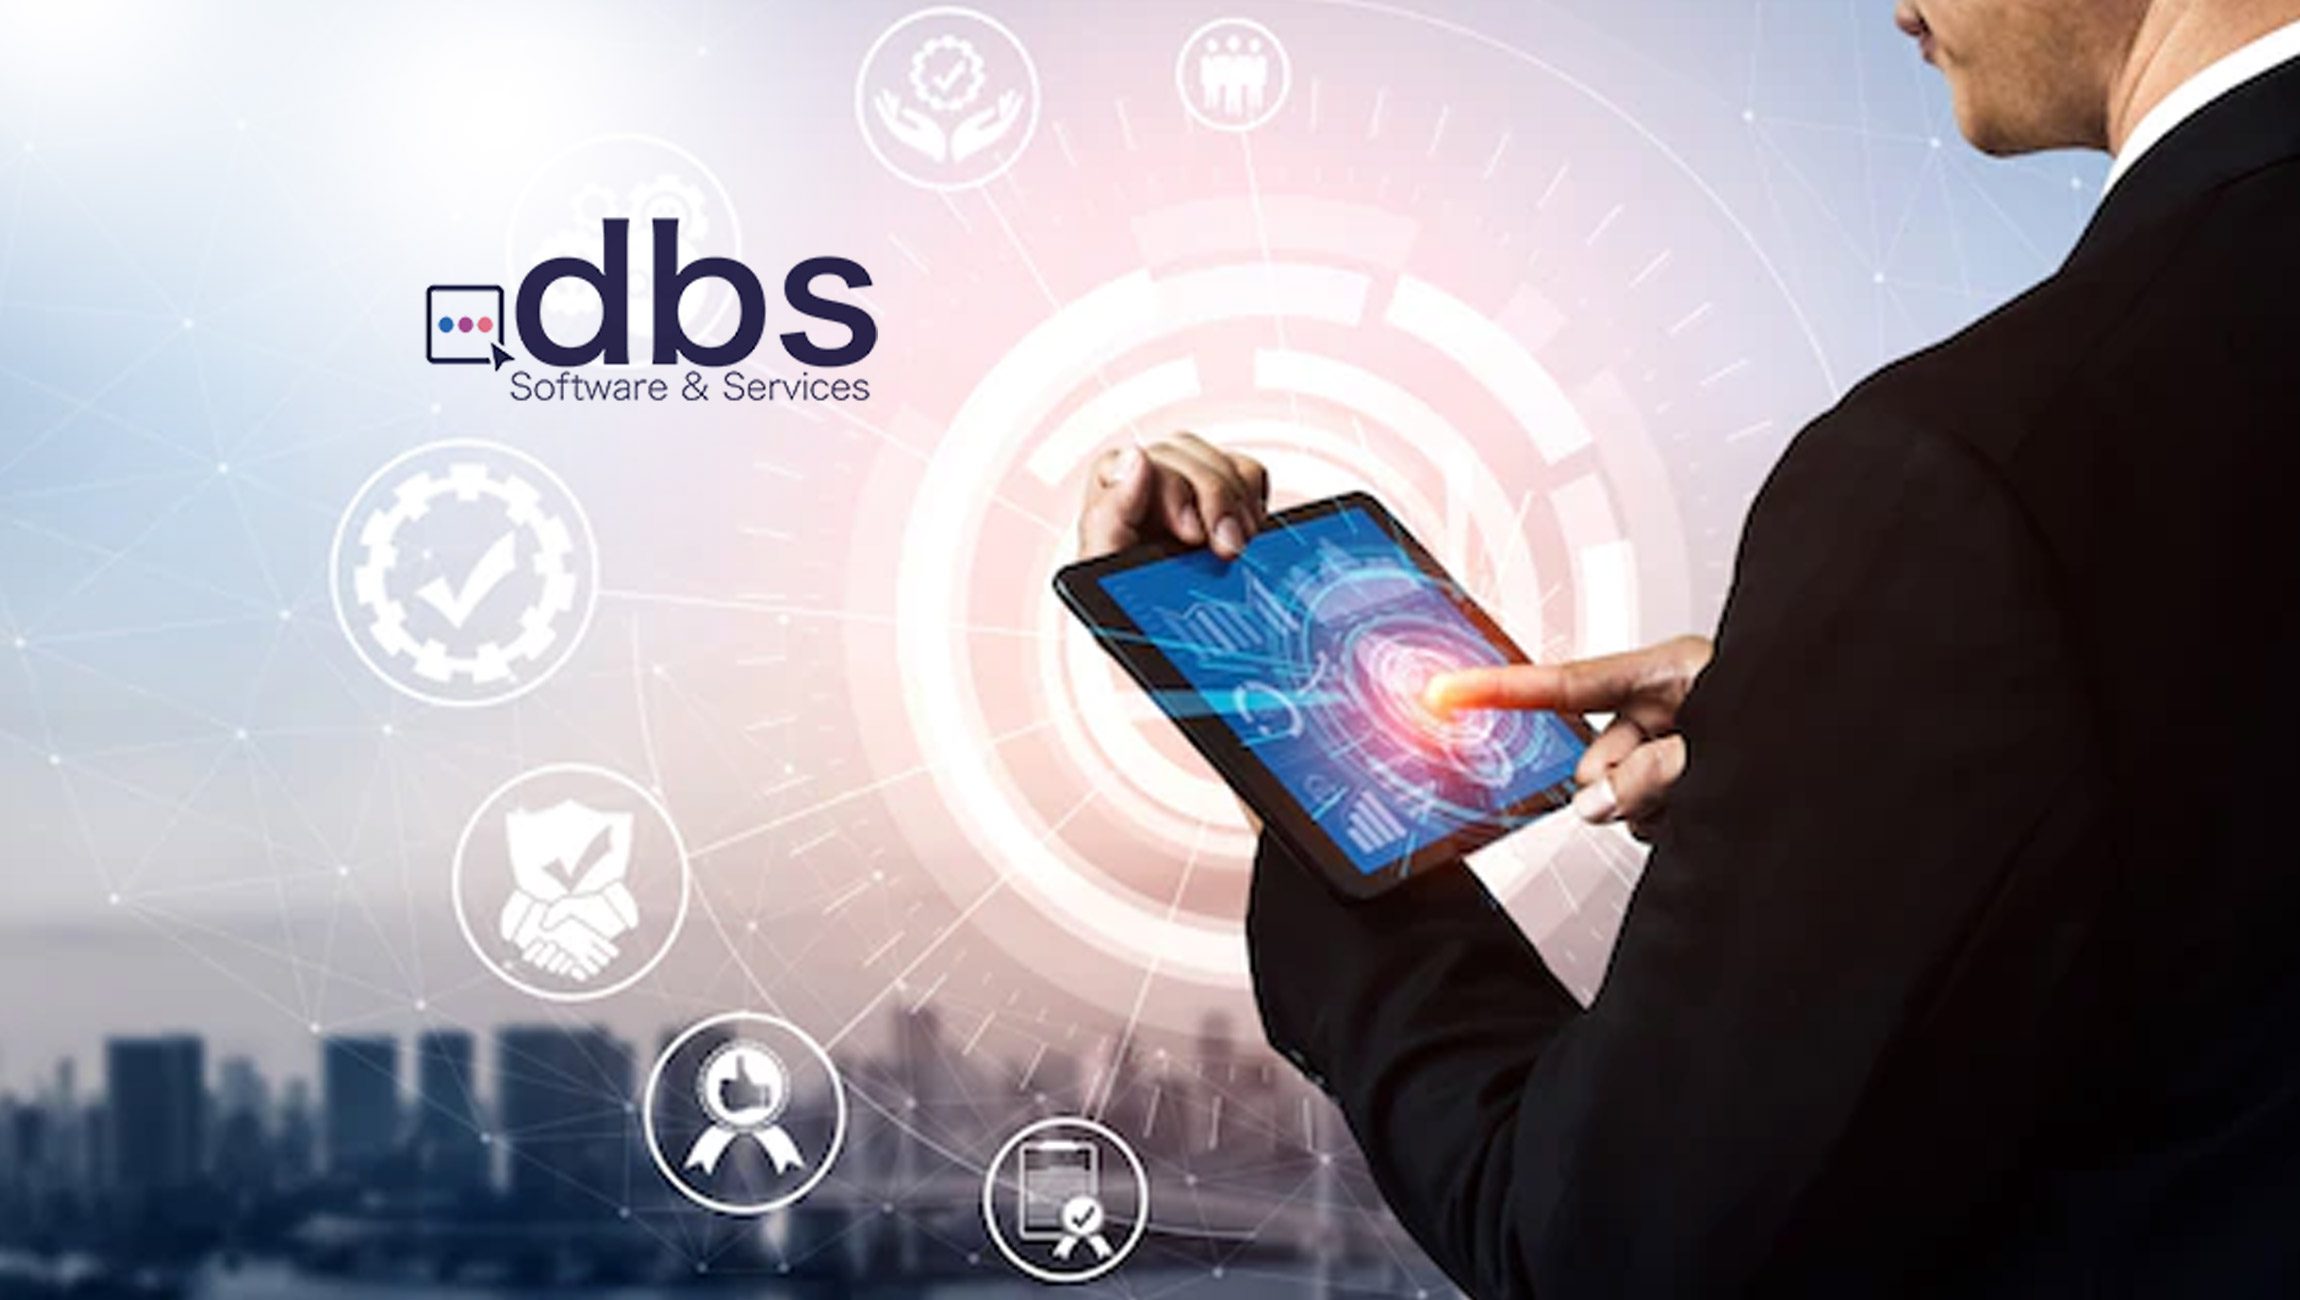 dbs Software and Services Announces General Availability of LiveForms 1.2 and Introduces Two New Subscription Tiers